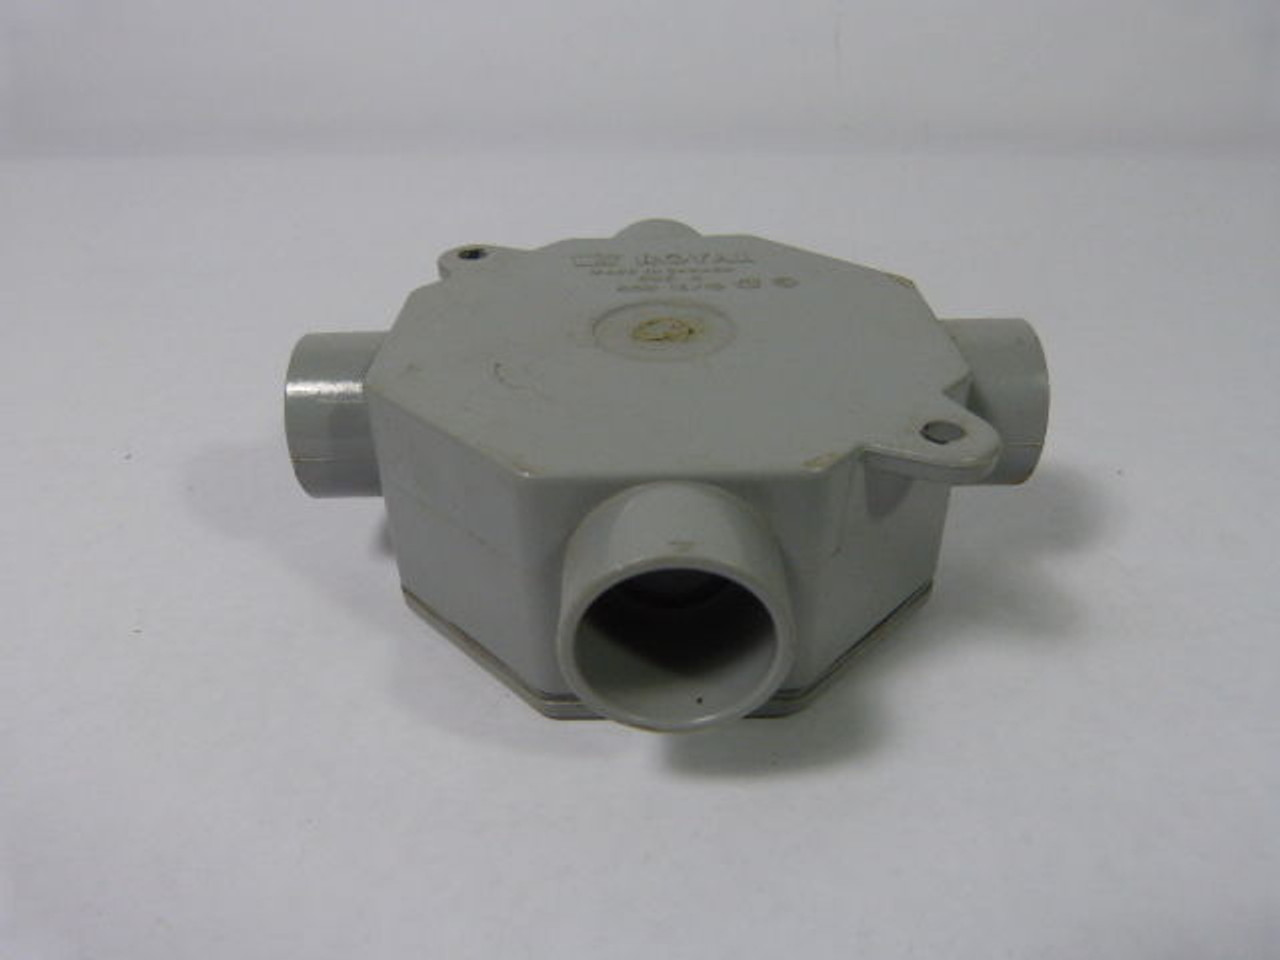 Royal ROB 15/10 Conduit Cover USED